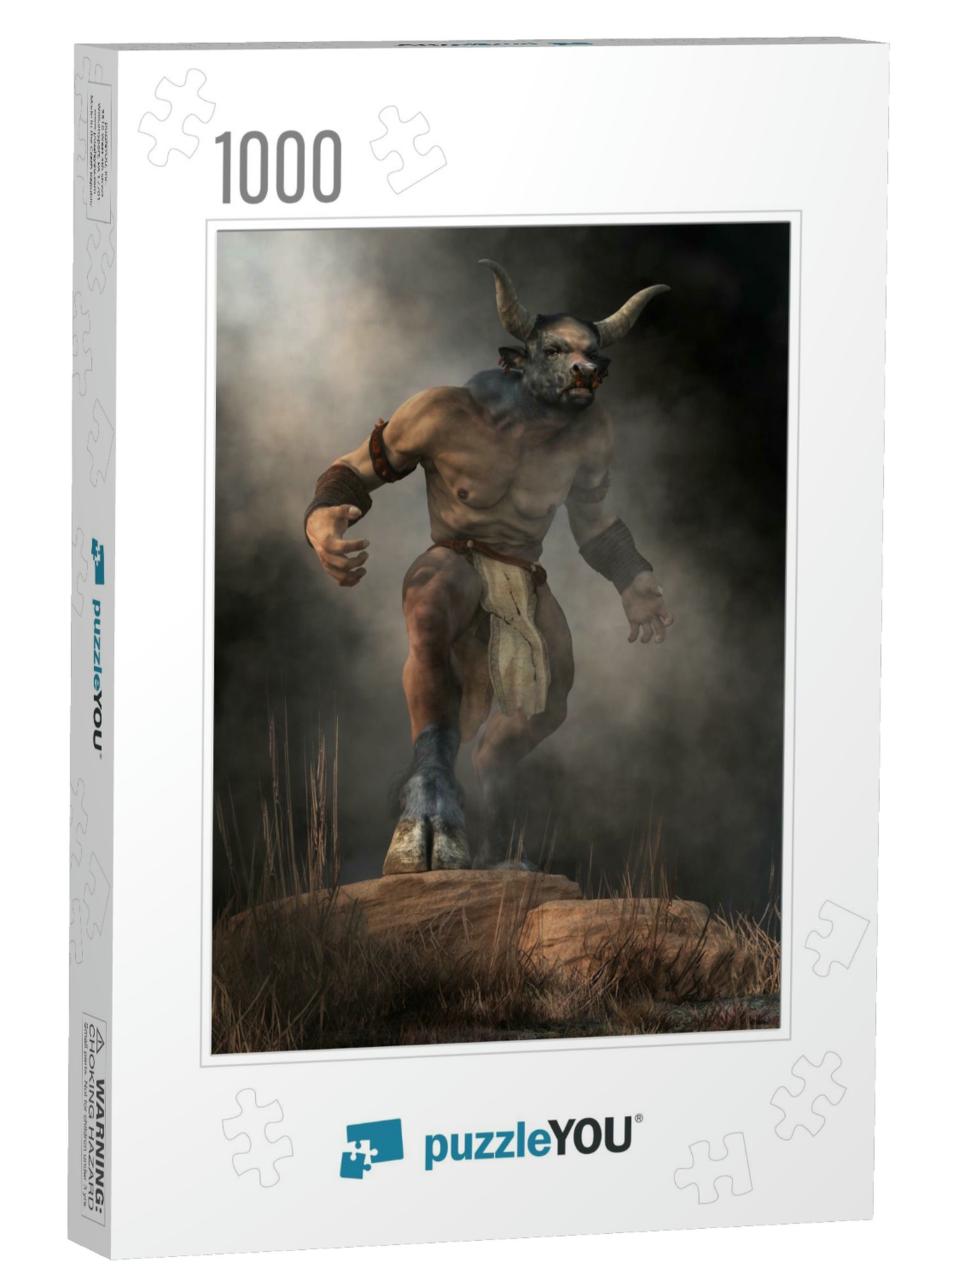 The Minotaur, Half Man Half Bull, Stands on a Rock in an... Jigsaw Puzzle with 1000 pieces